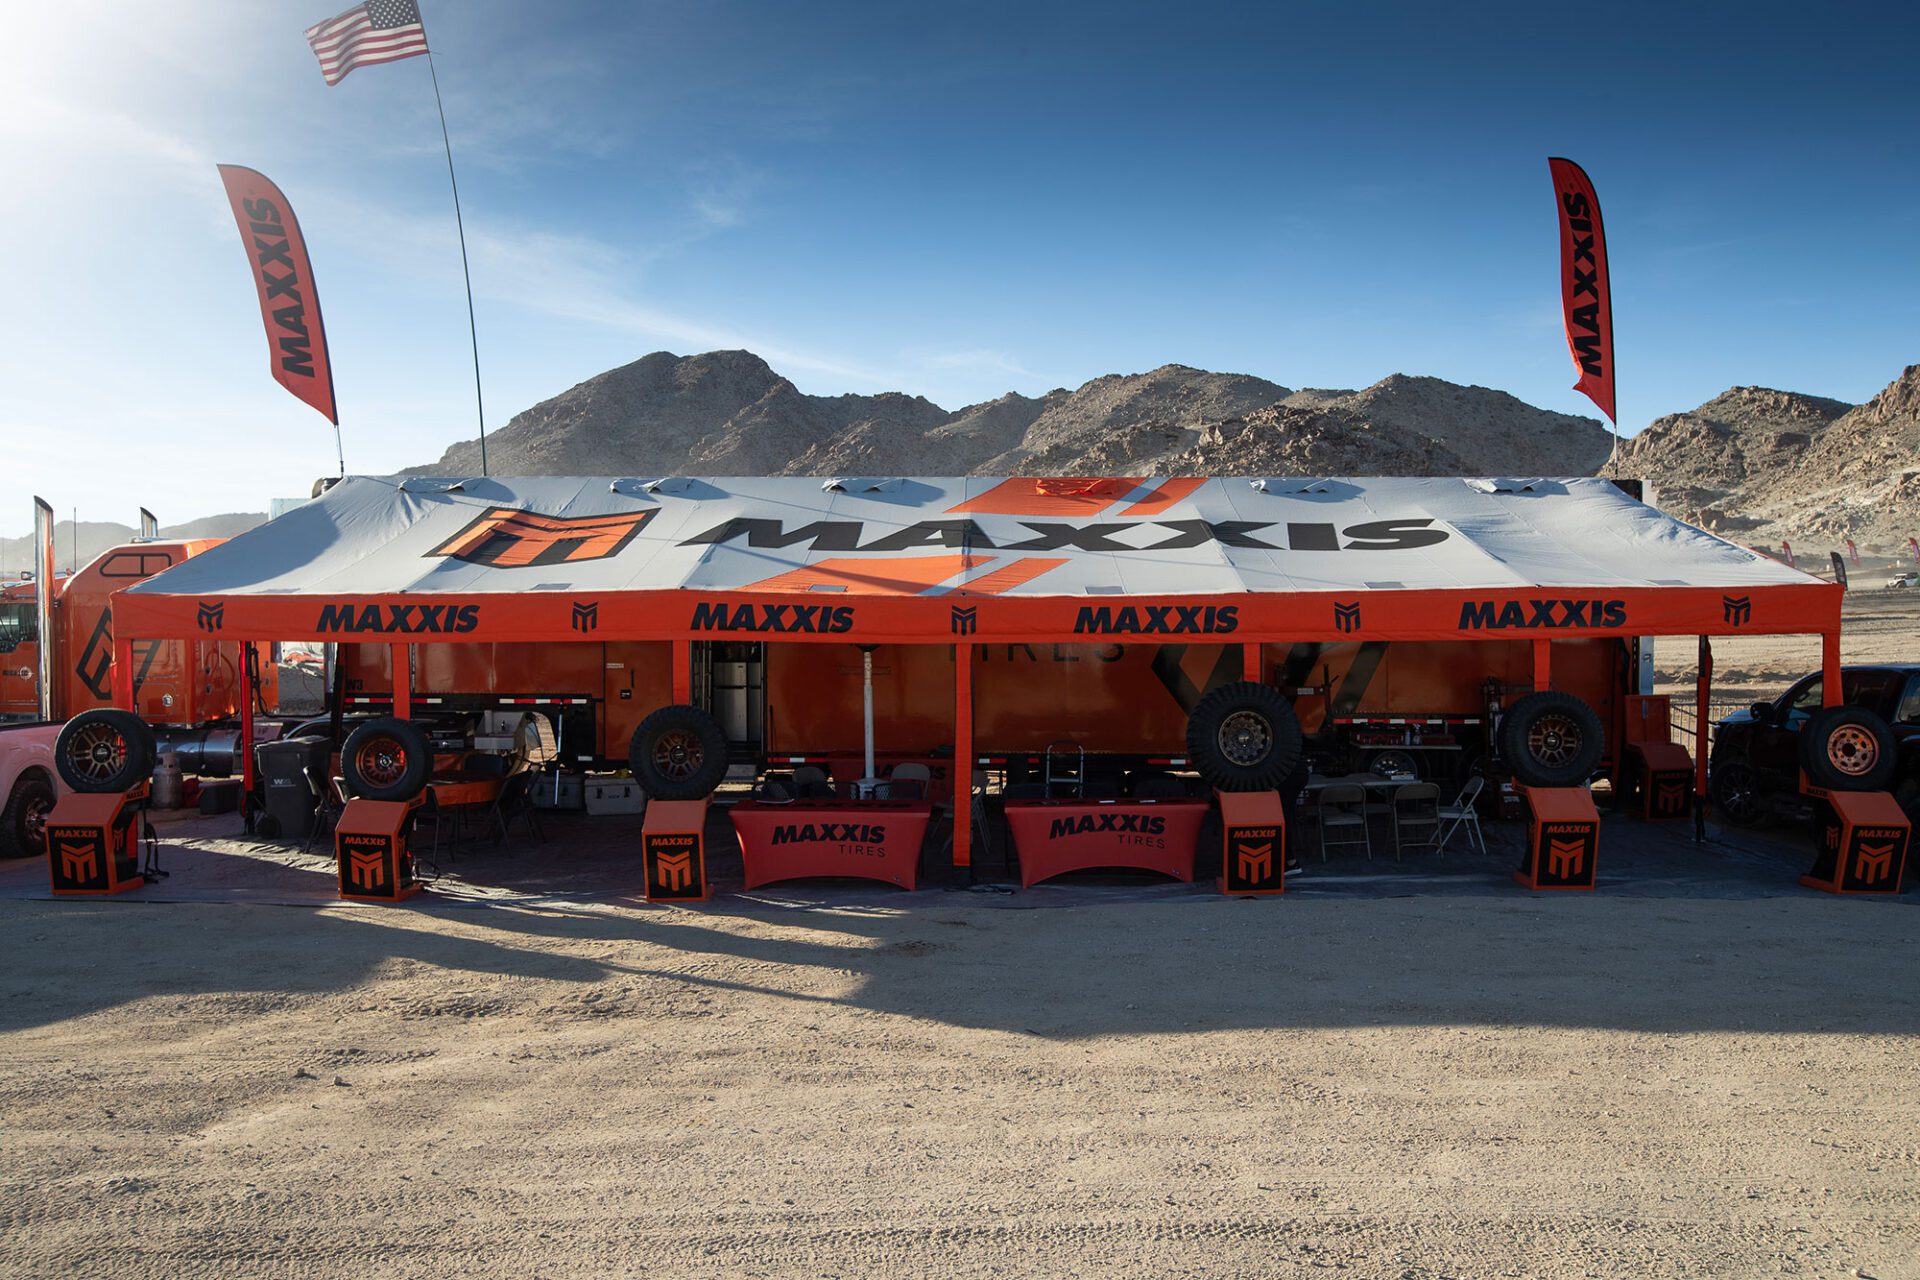 Maxxis support truck at king of the hammers.